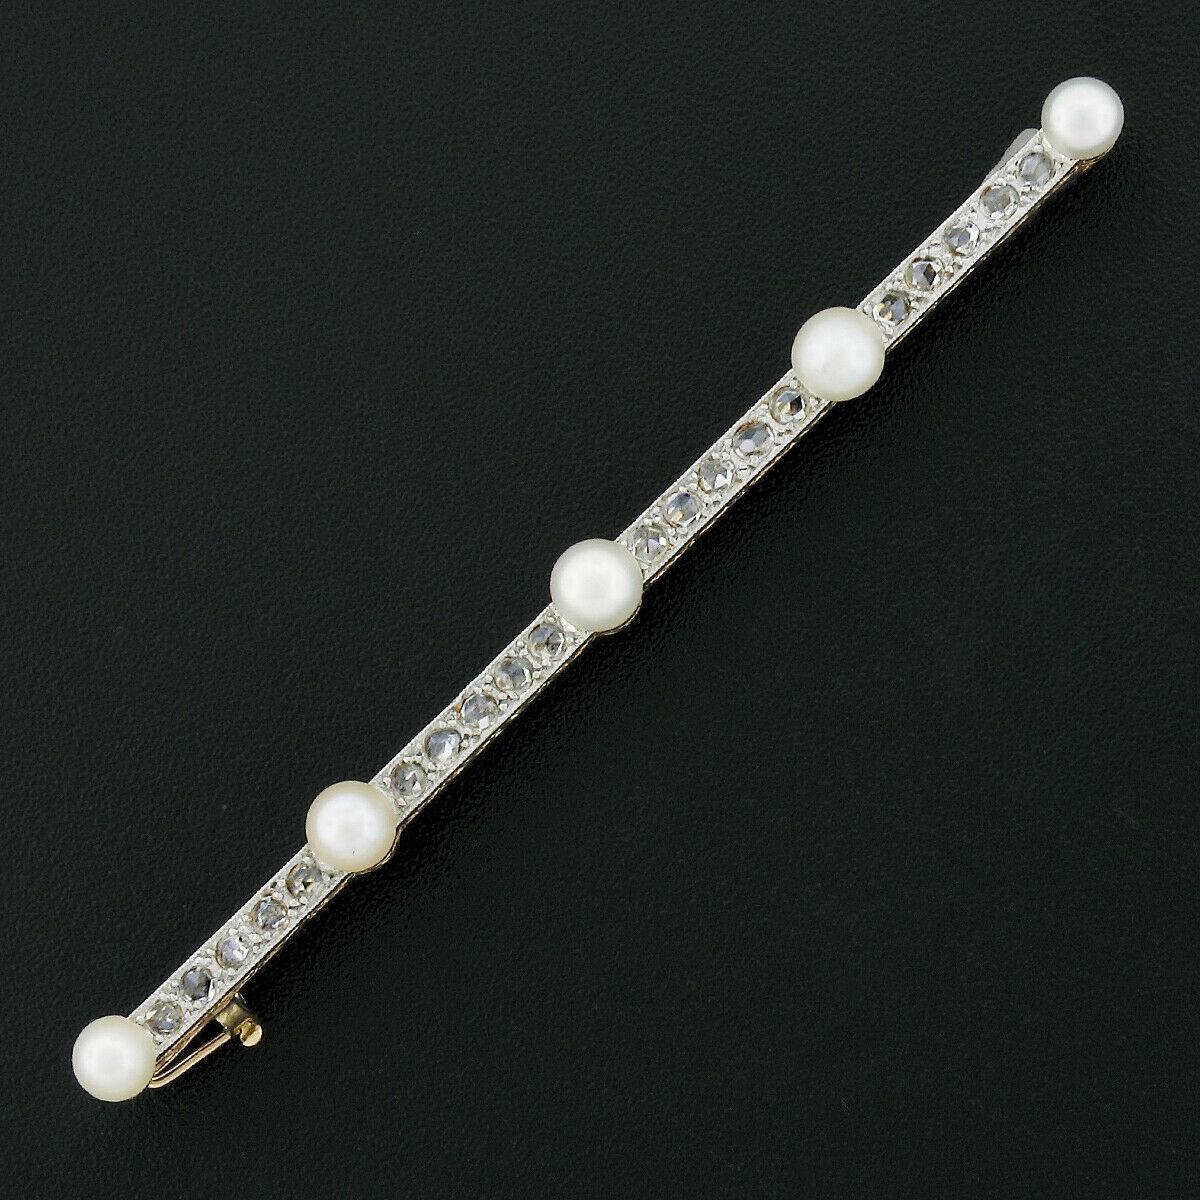 This magnificent and classy antique bar pin brooch was crafted in France from solid 18k yellow gold with a solid platinum top that carries fine diamonds and cultured pearls throughout. The lovely pearls are equally spaced across the top and are well